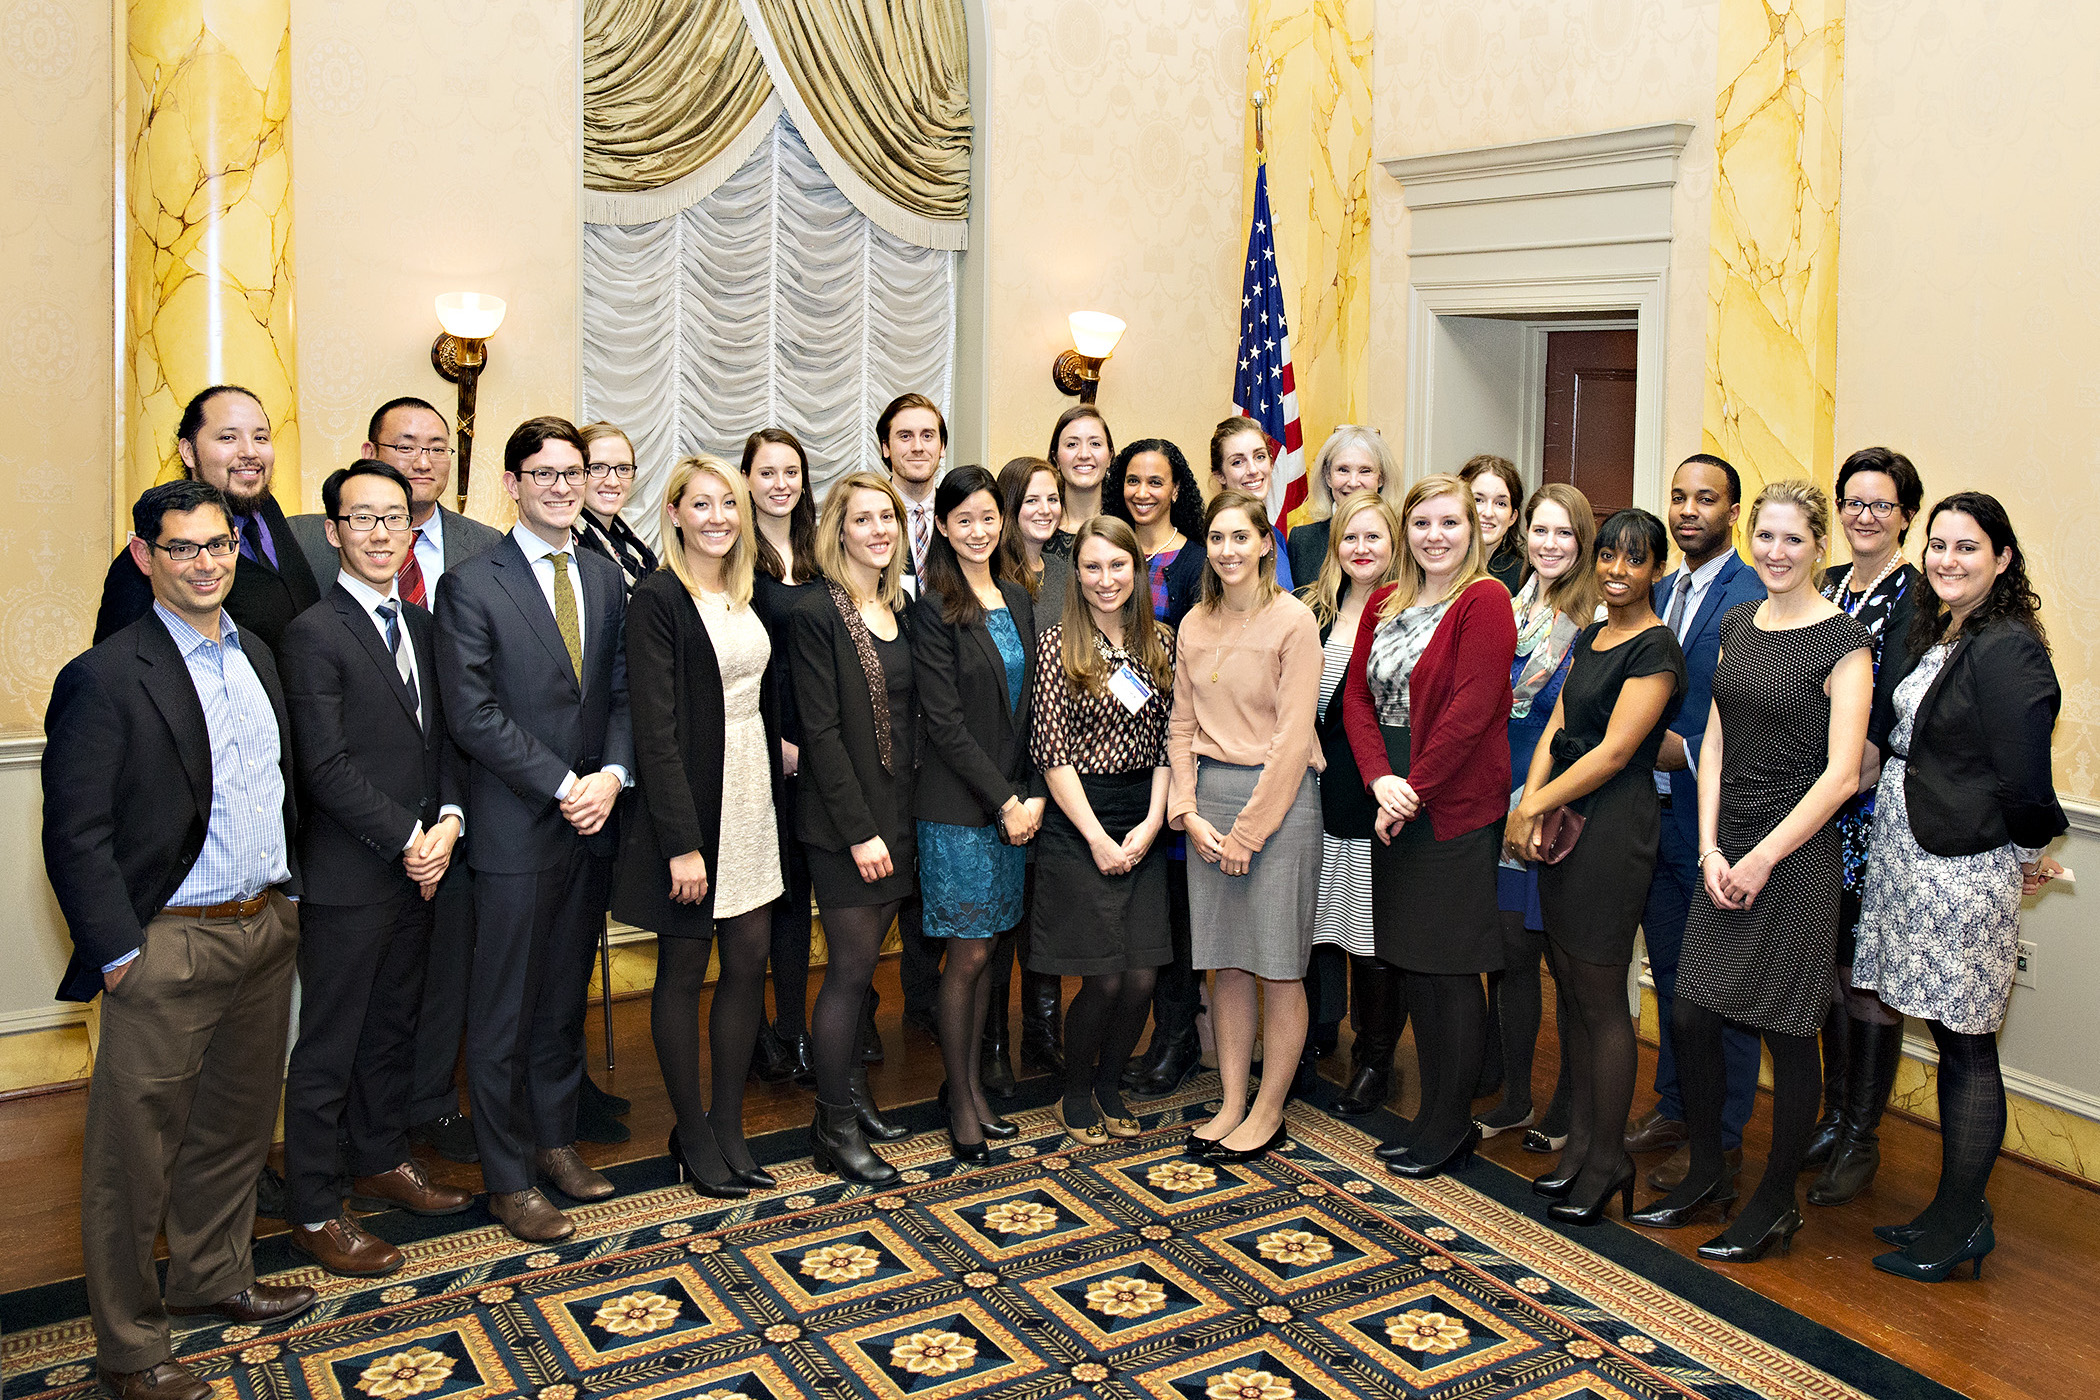 The annual alumni reception held by the Office of Alumni Relations in January 2017 in conjunction with TC’s week-long Federal Policy Institute (FPI) in Washington, D.C.